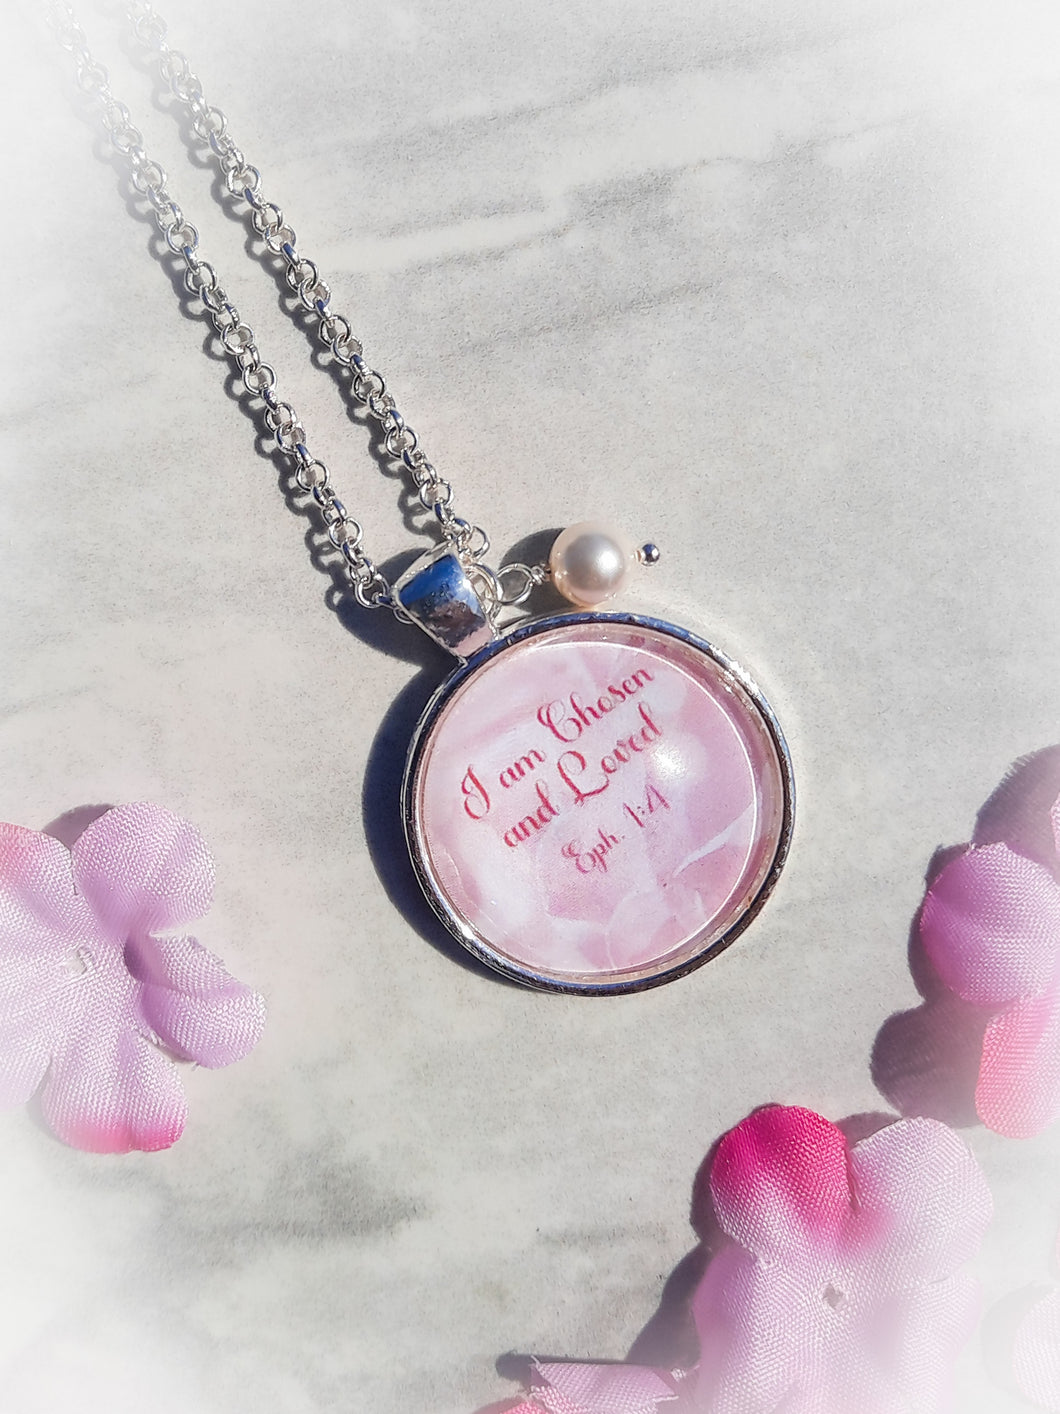 I Am Chosen And Loved / Ephesians 1:4 / Bible Verse Necklace / White Crystal Pearl Charm